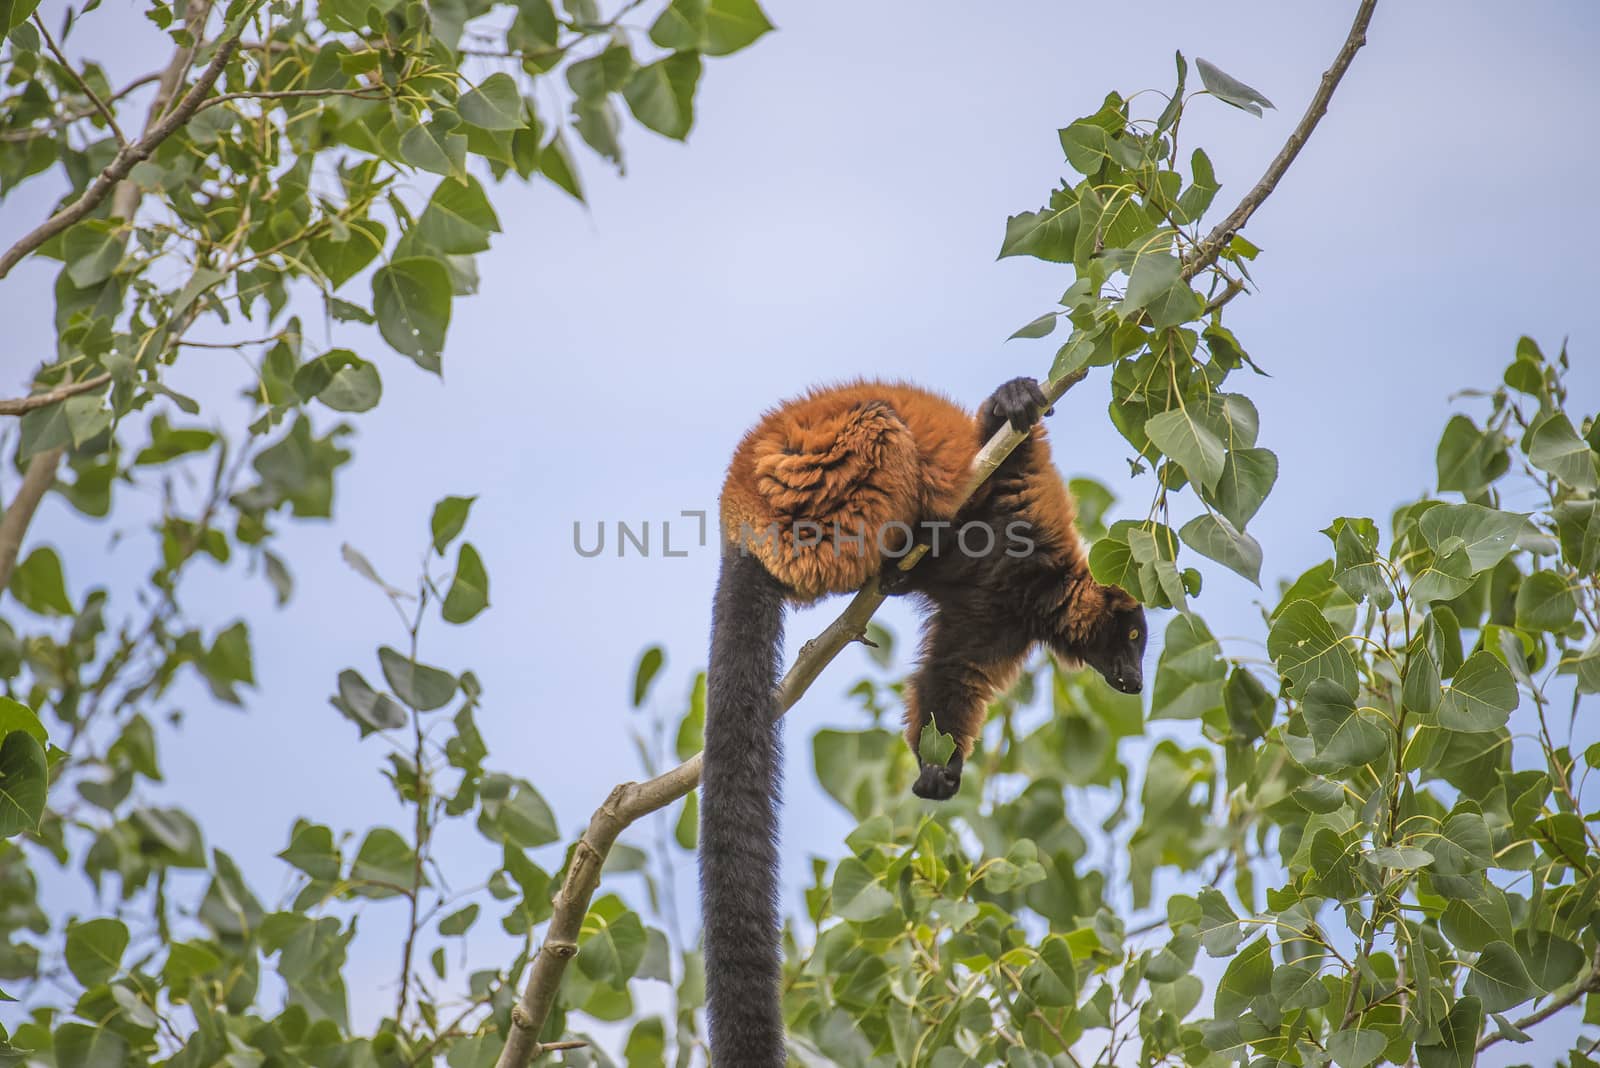 Red ruffed Lemur (Varecia rubra) is a clade consisting of approximately 50 species of primates in the group half-apes.  Like all lemurs, it is native to Madagascar and occurs only in the rainforests of Masoala, in the northeast of the island. Photo is shot 27/07/2013.